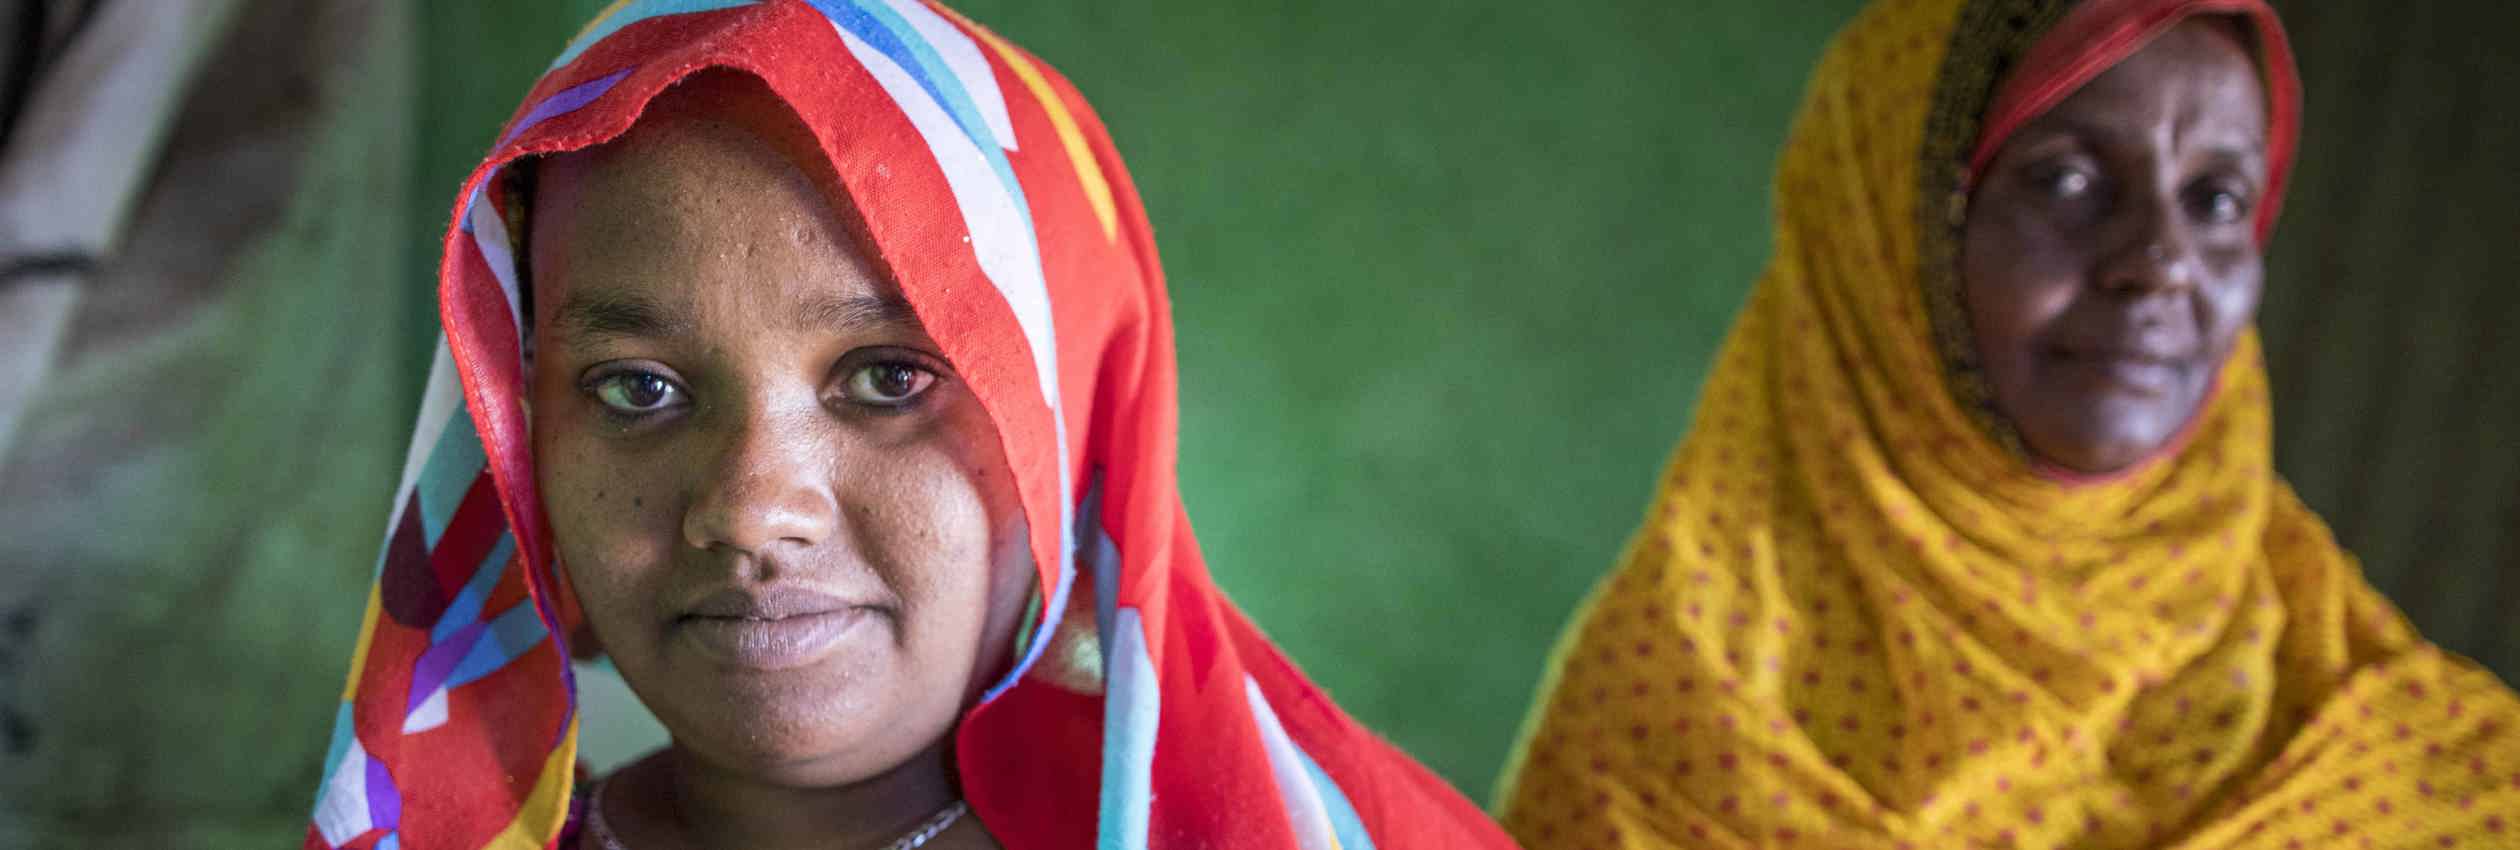 Eritrean refugee Hallima (in yellow), 45, and her daughter Dunya, 19, are photographed at Mai Aini camp in the Tigray region of Ethiopia, during a visit of UN High Commissioner for Refugees Filippo Grandi. 